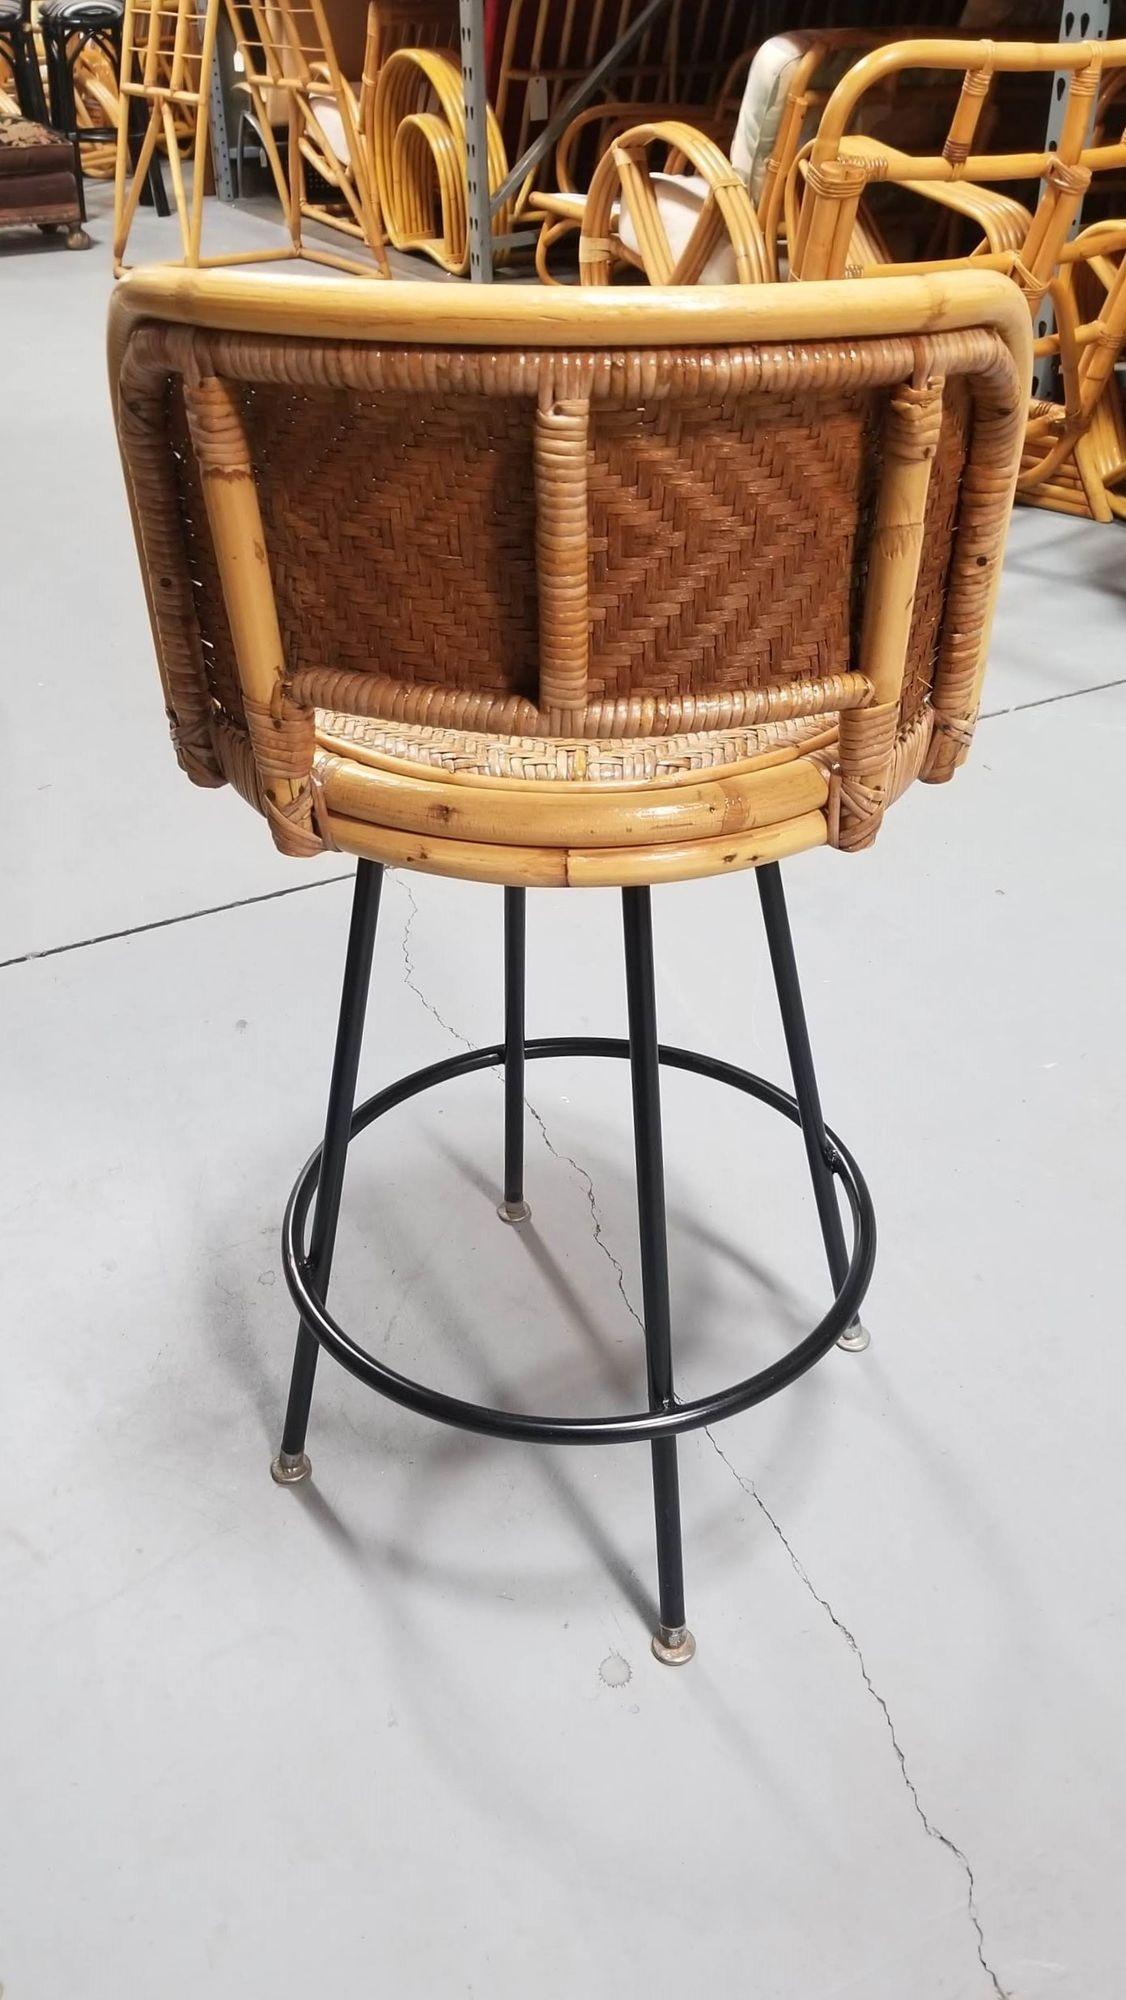 Restored Rattan & Wicker Swivel Bar Stool w/ Iron Base, Seng of Chicago In Excellent Condition For Sale In Van Nuys, CA